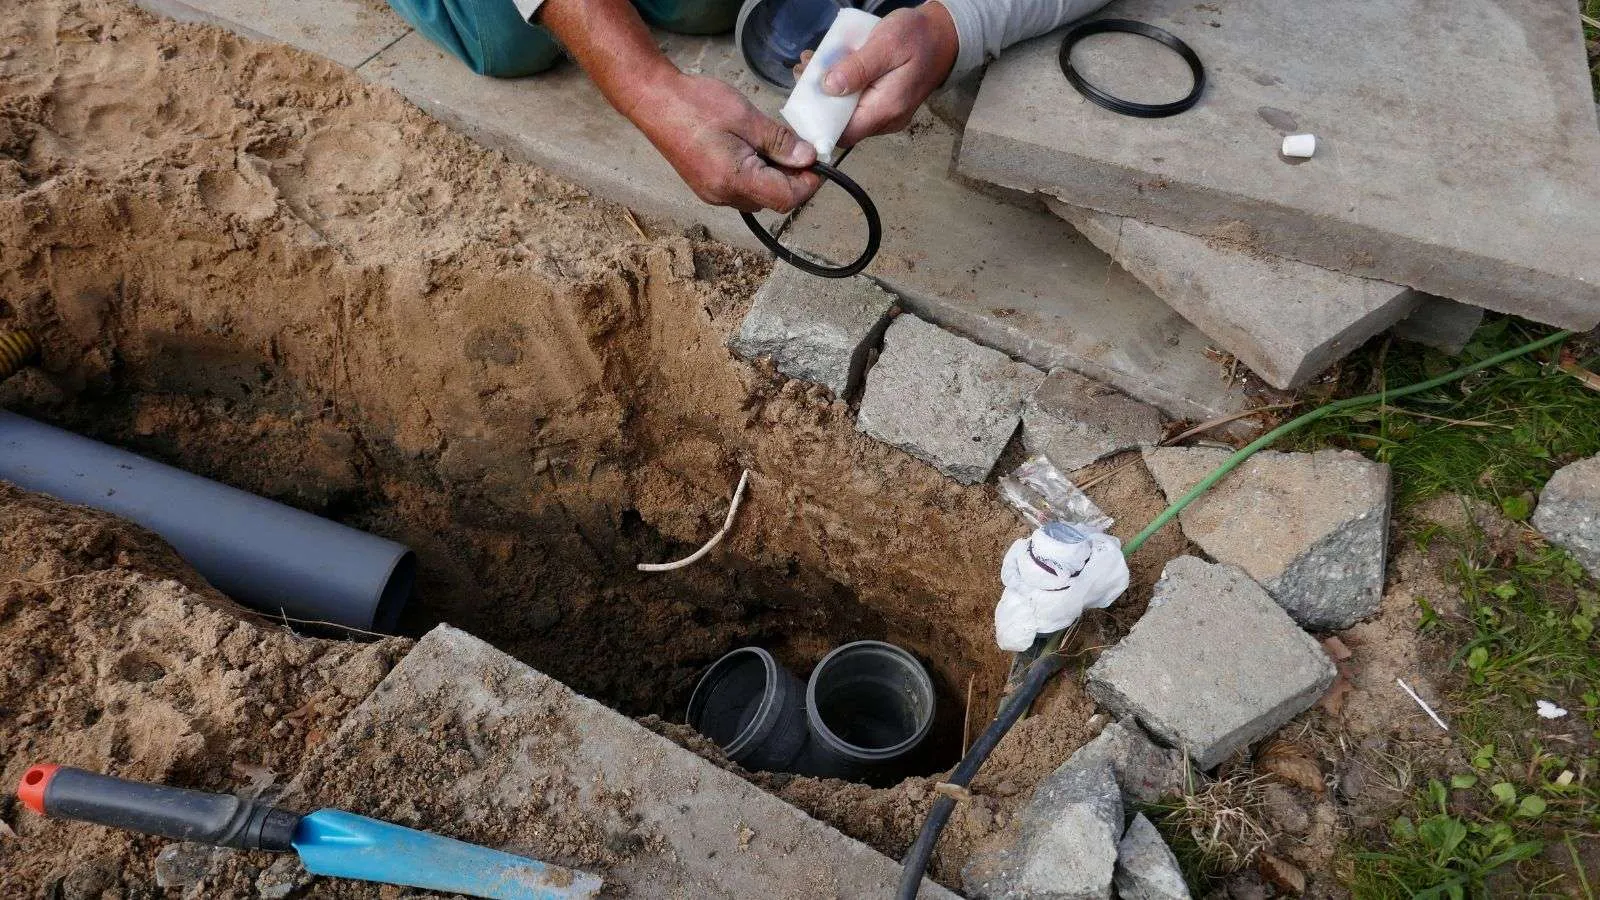 Sewer line repair - bighomeprojects.com